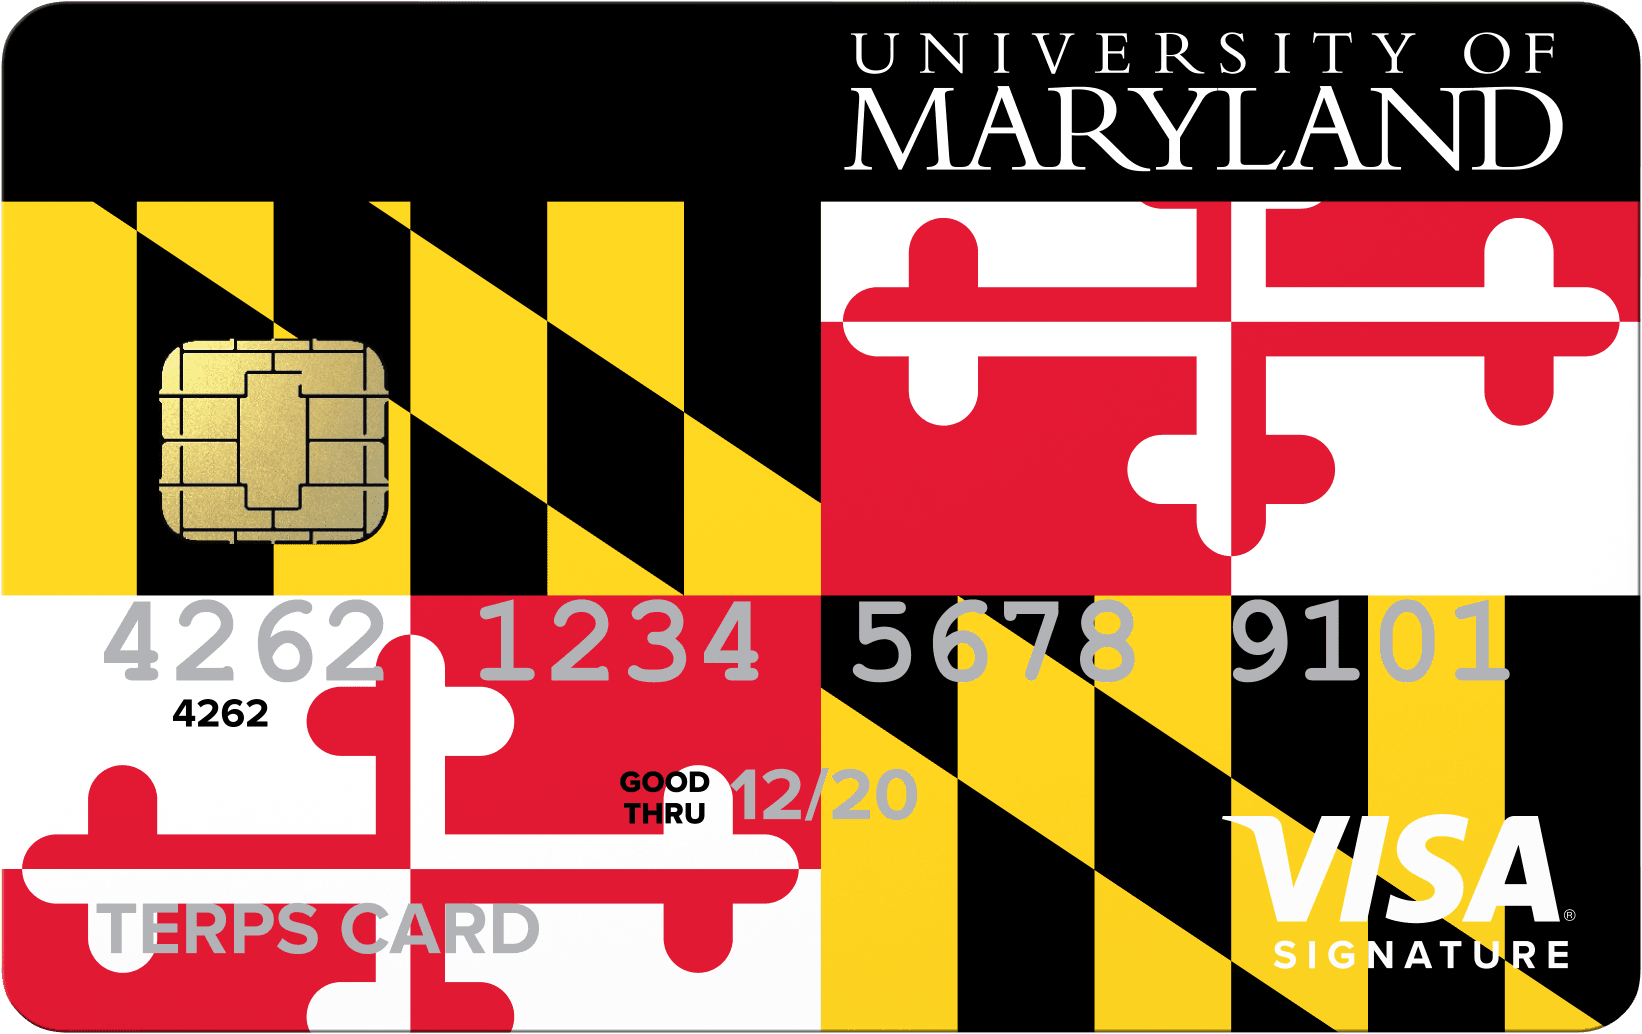 University of Maryland Terps Credit Card